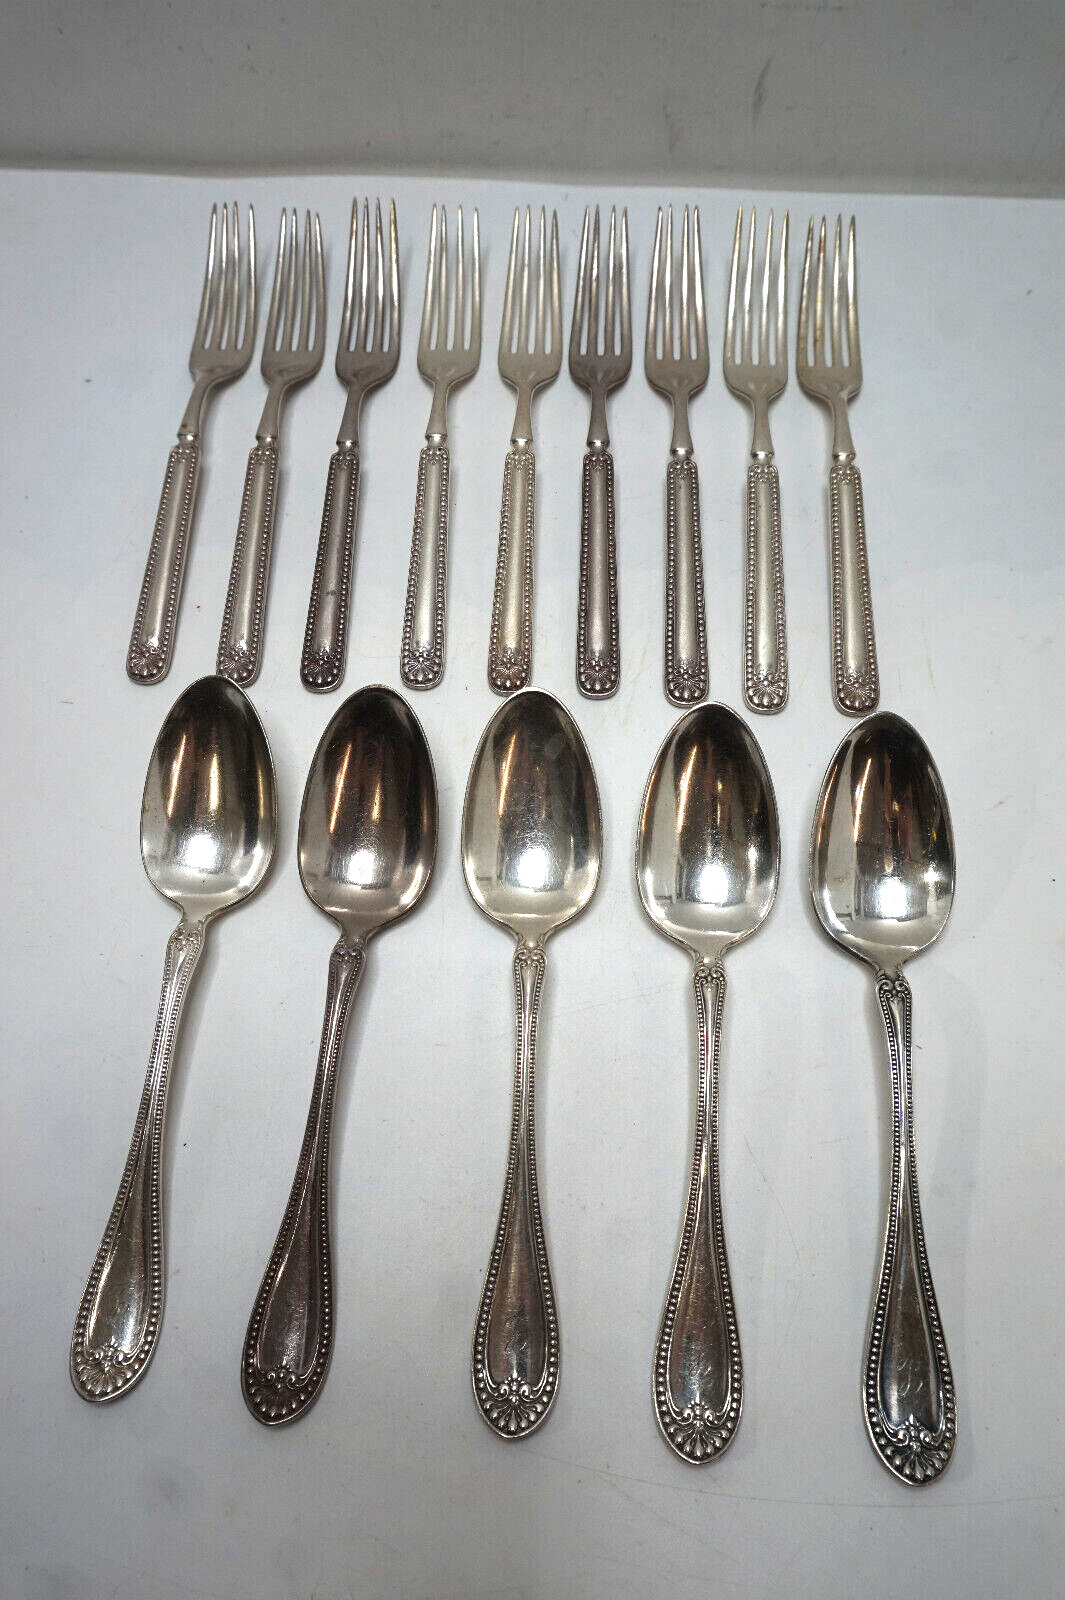 ANTIQUE 1835 WALLACE STUART SILVERPLATE FLATWARE 1899 FORKS TABLE SPOONS 14pc